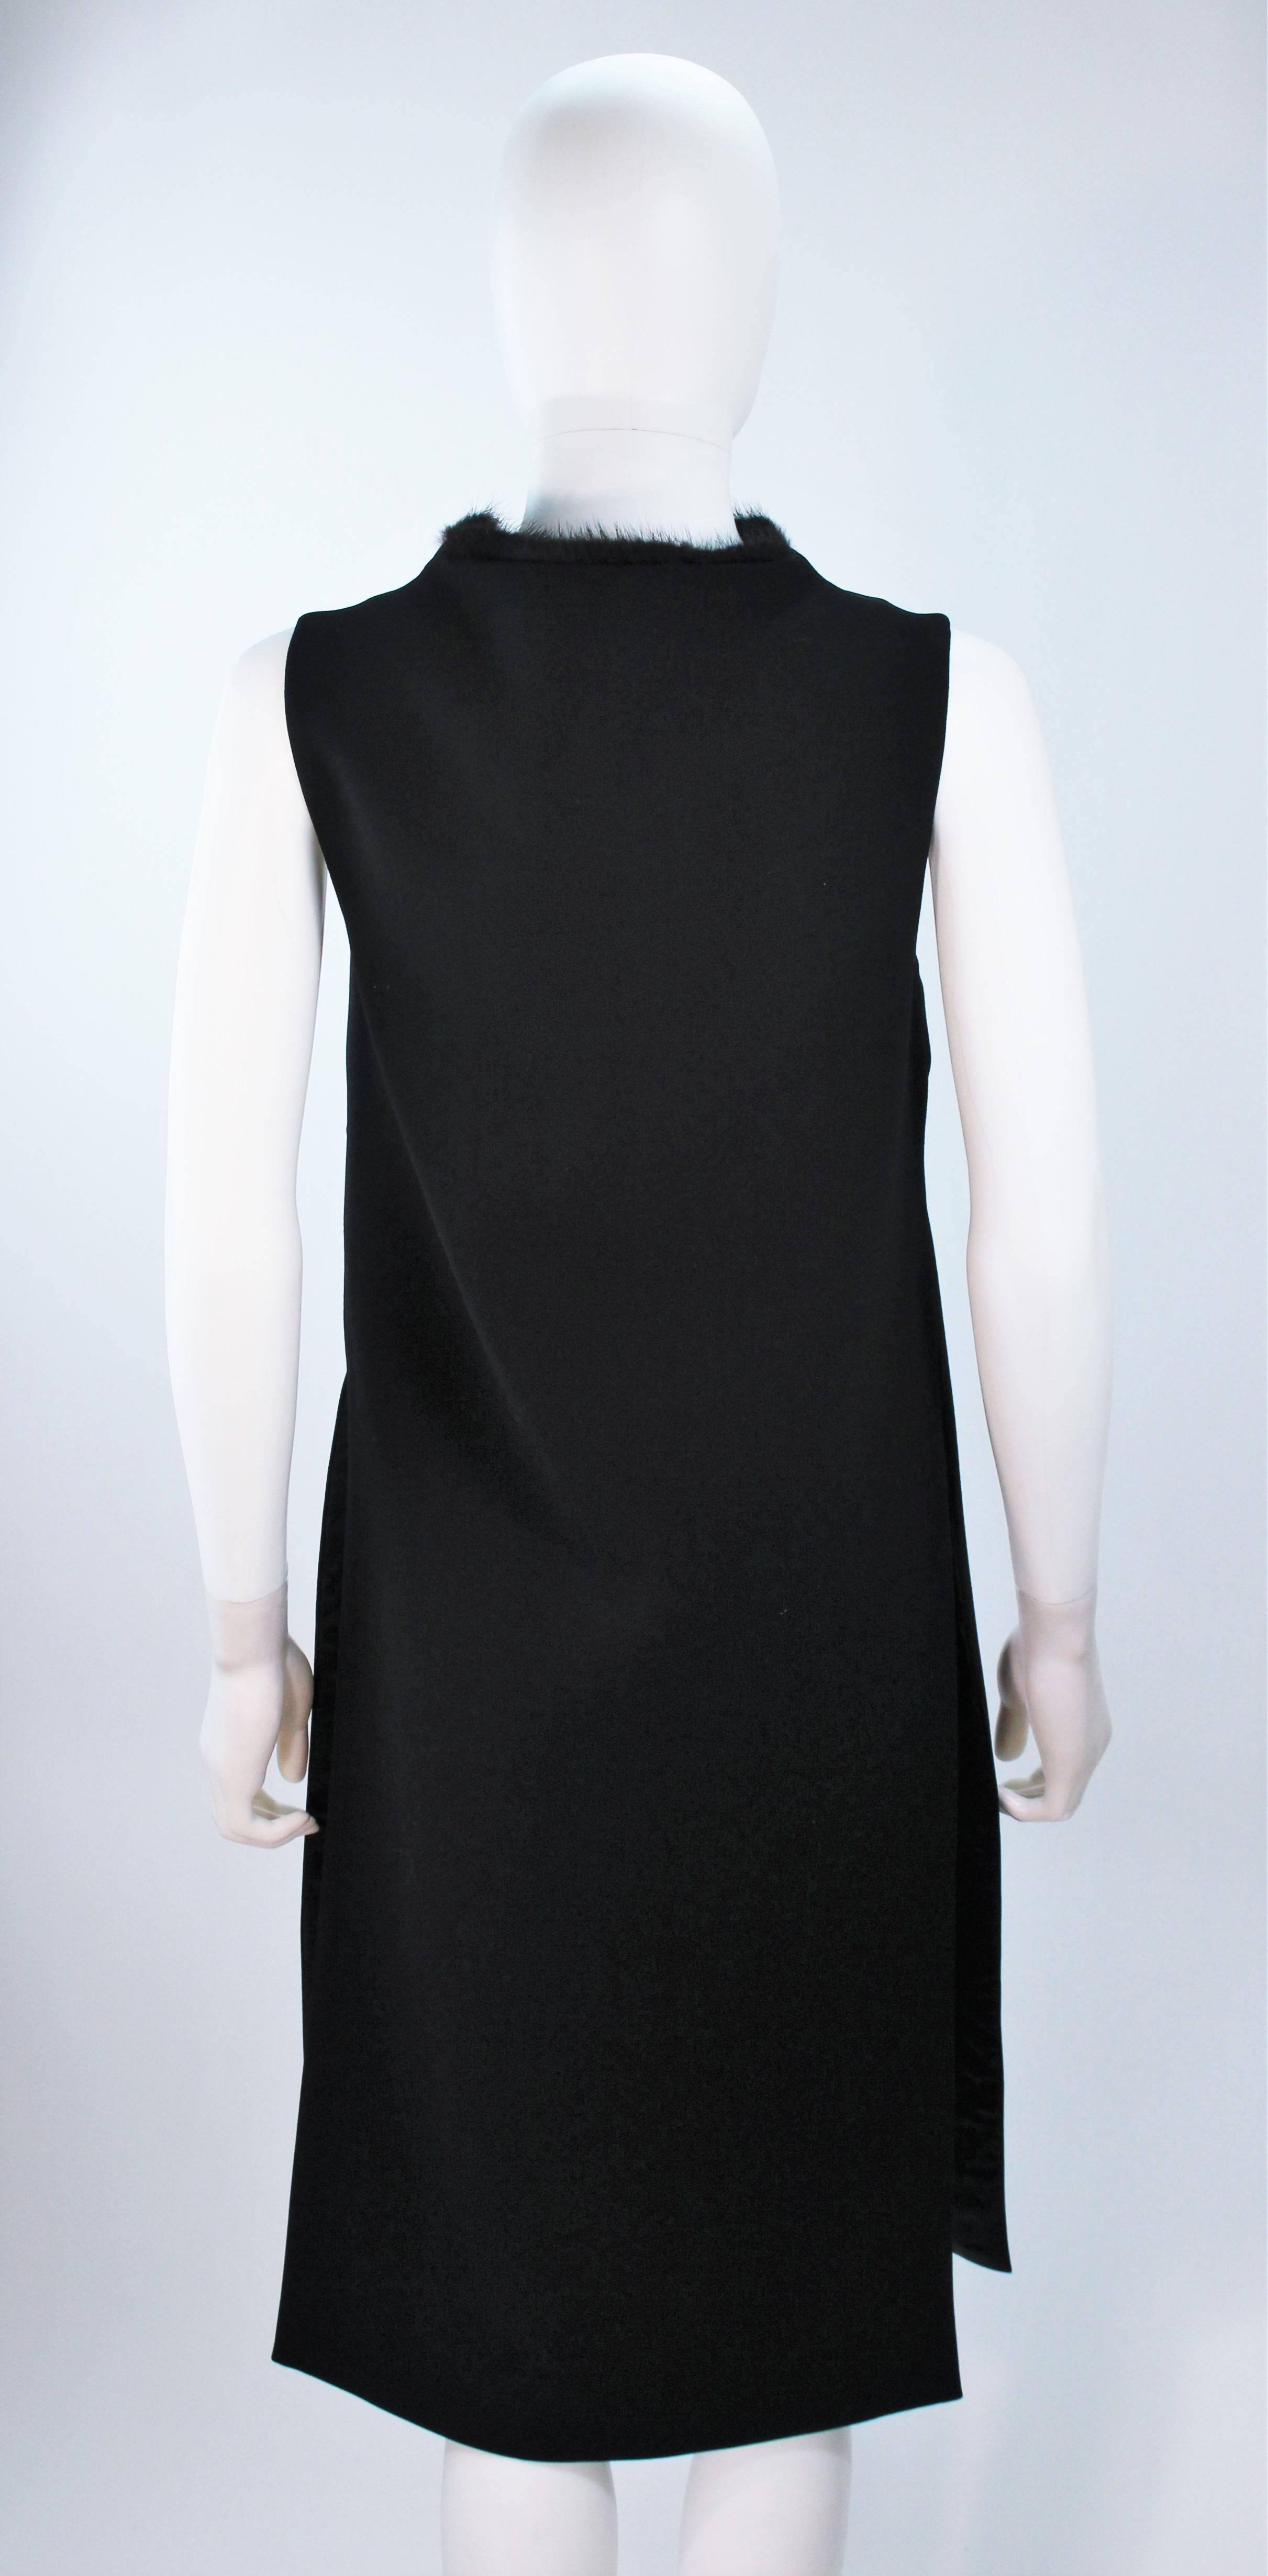 GIANNI VERSACE Black Wool Tunic Dress with Mink Collar and Open Sides Size 4-6 5